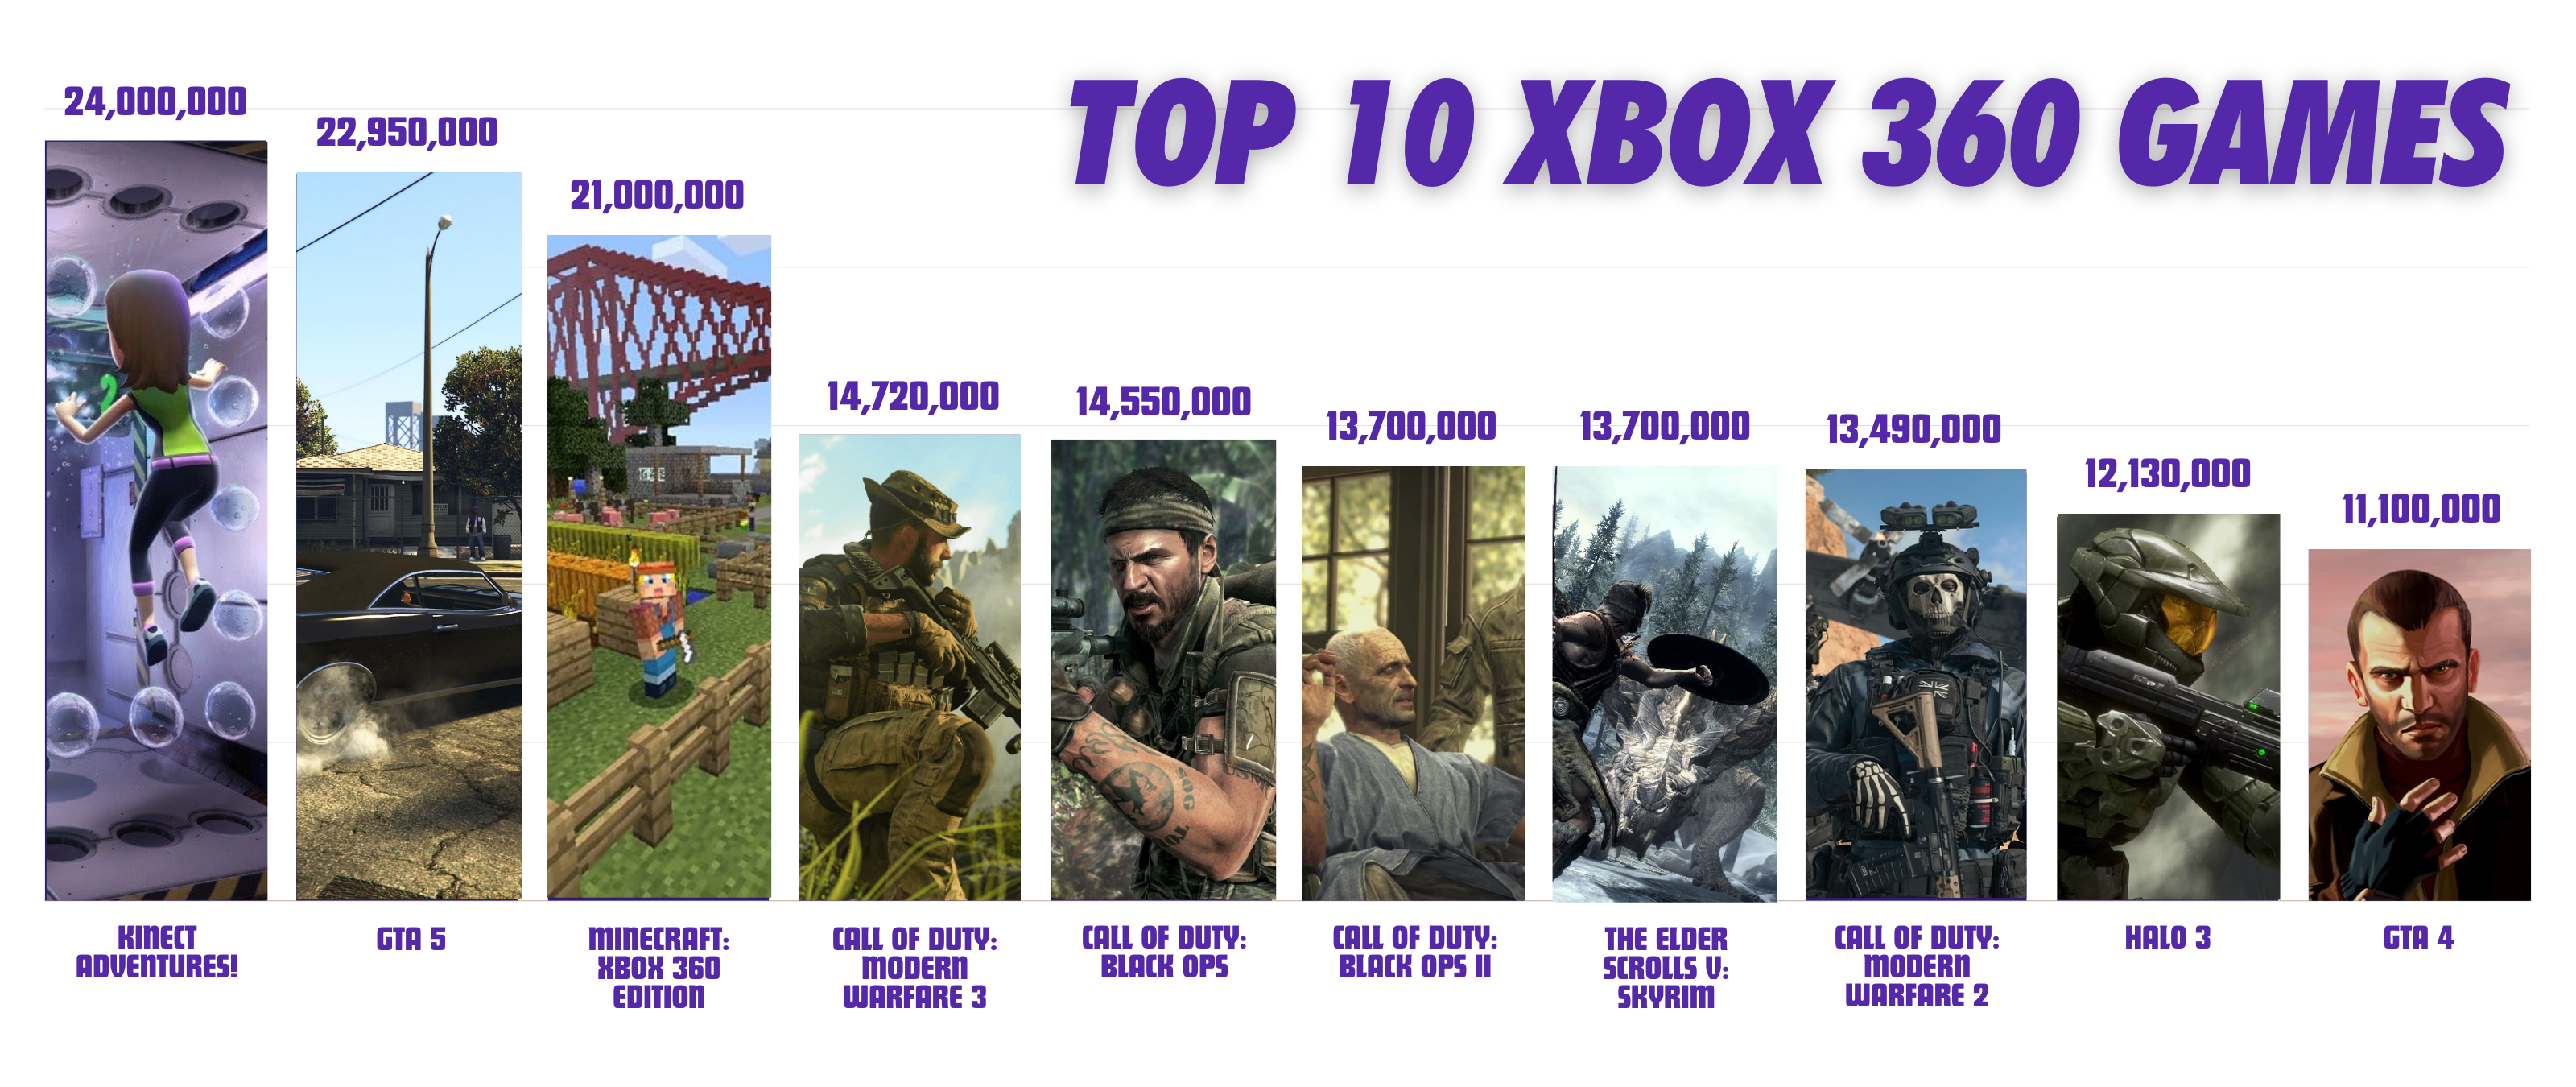 Best Selling Xbox 360 Games
